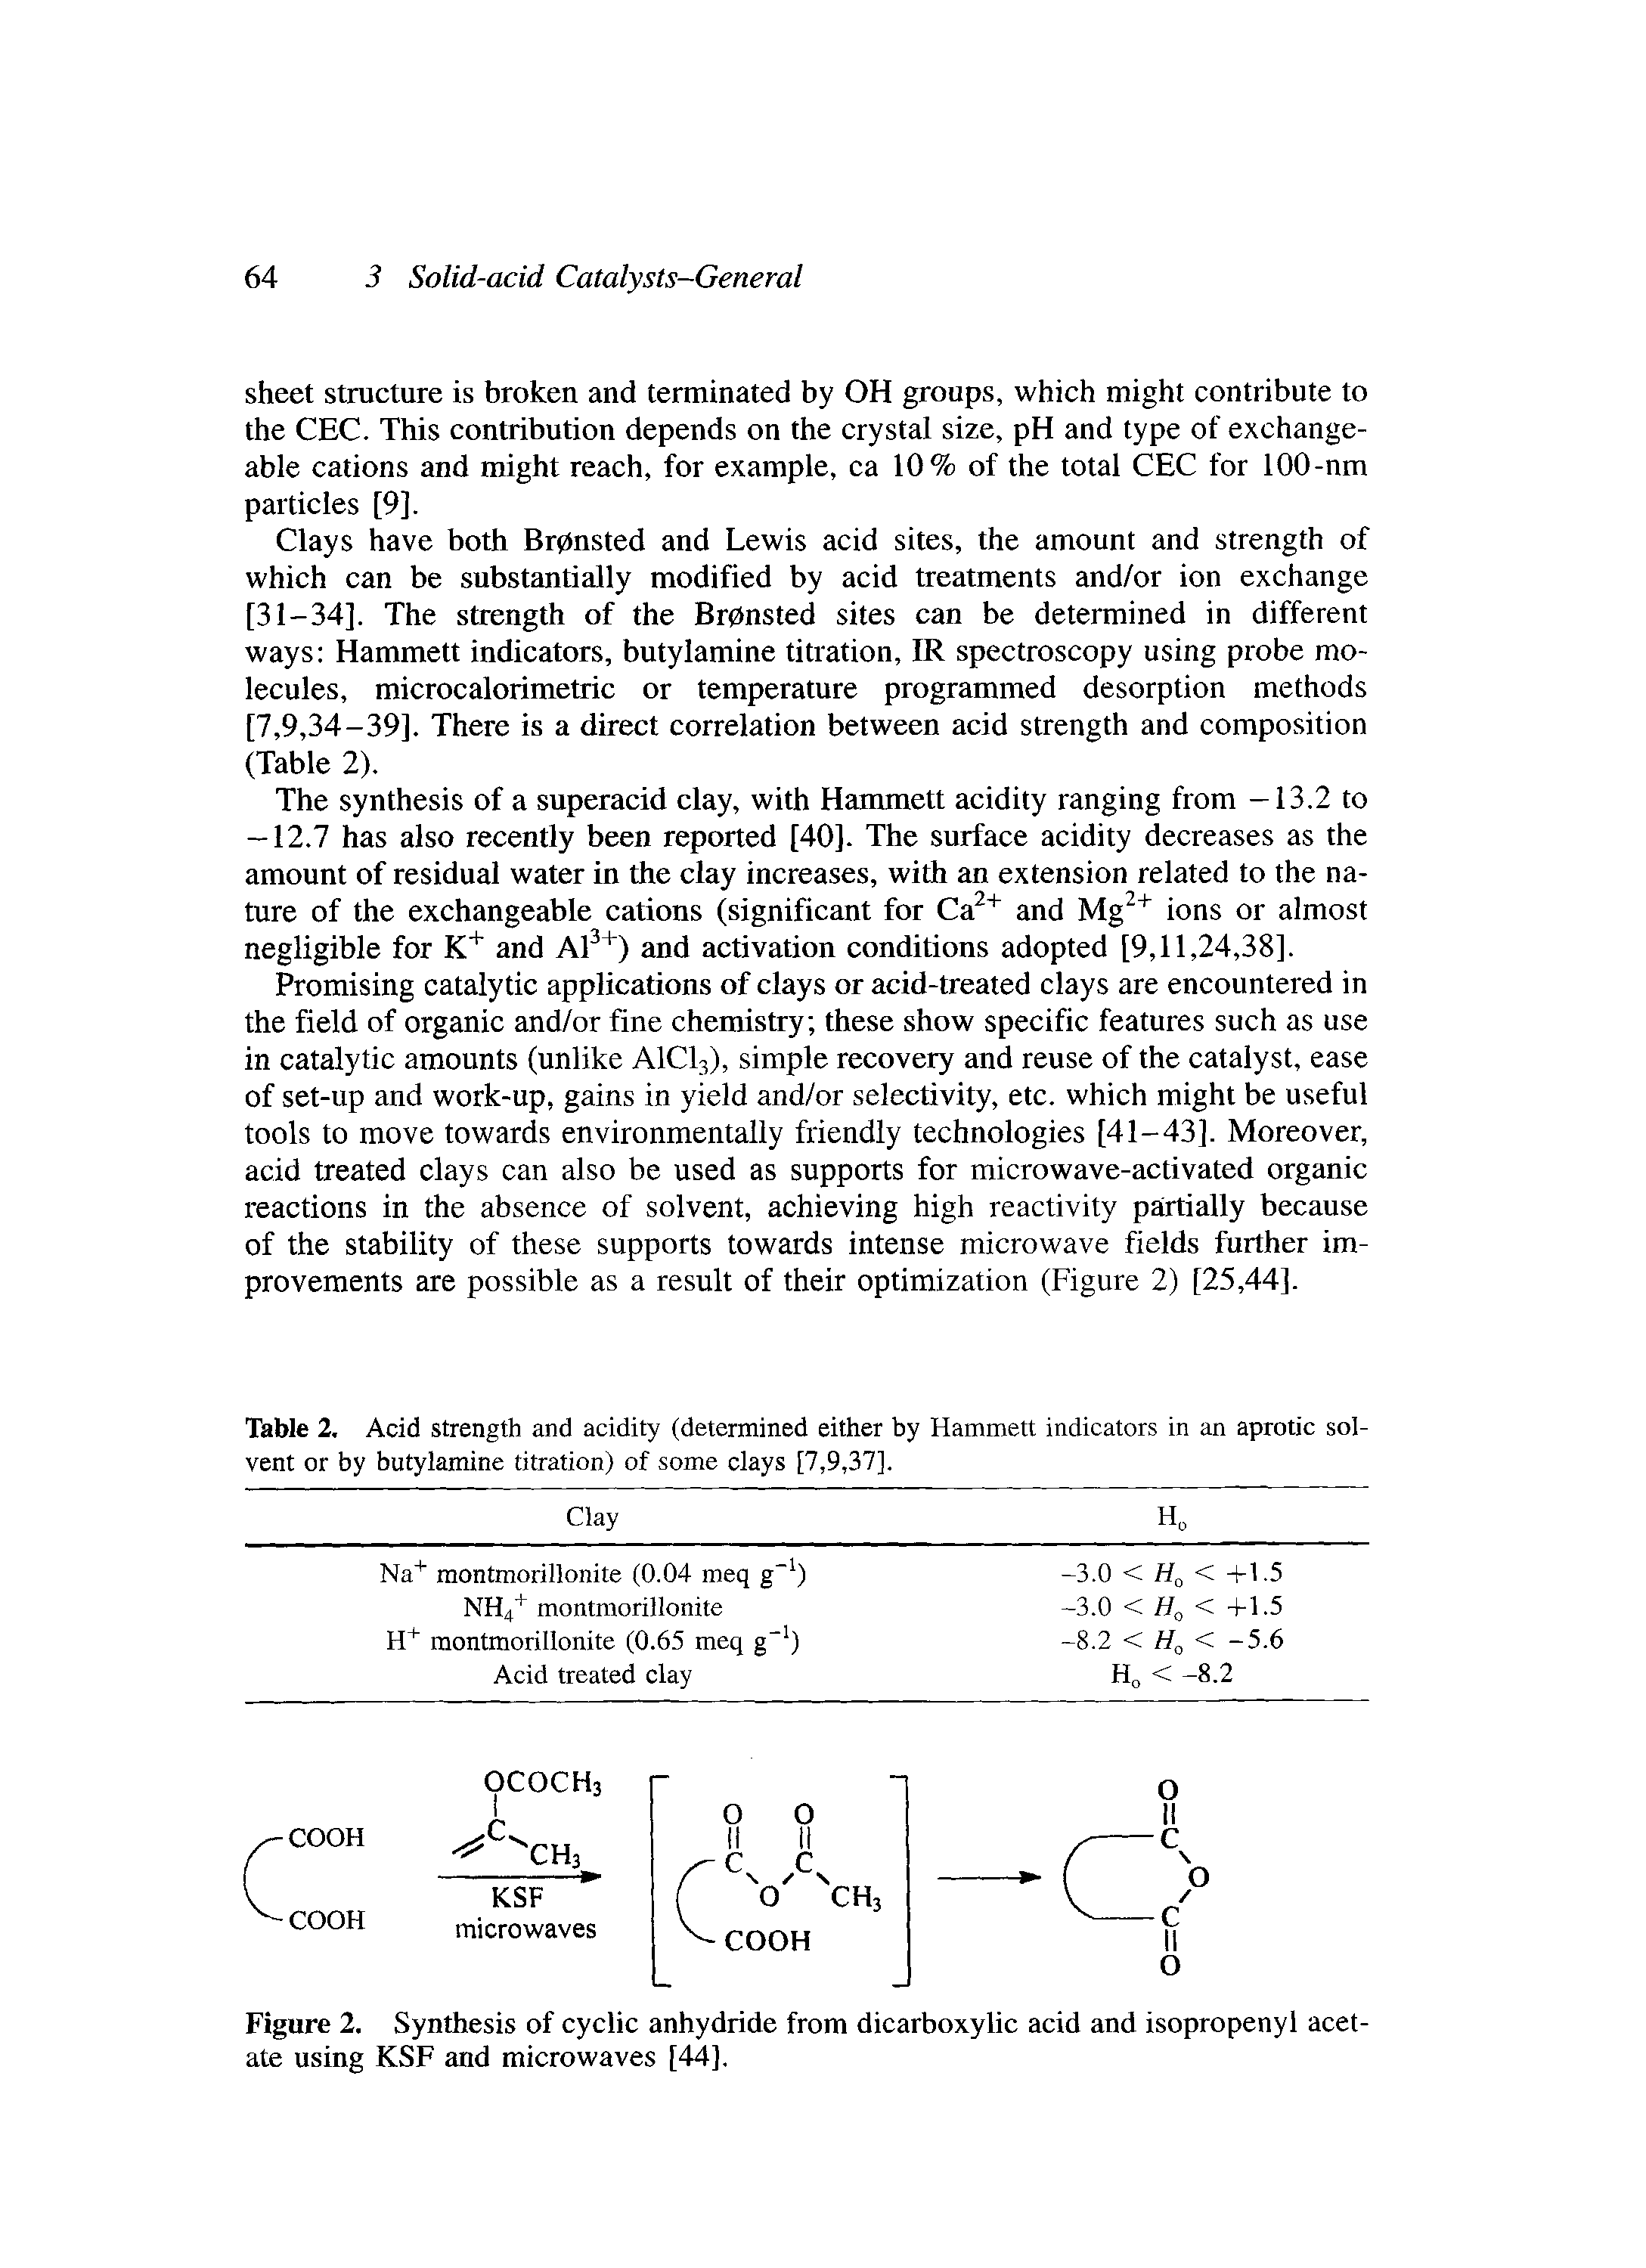 Figure 2. Synthesis of cyclic anhydride from dicarboxylic acid and isopropenyl acetate using KSF and microwaves [44],...